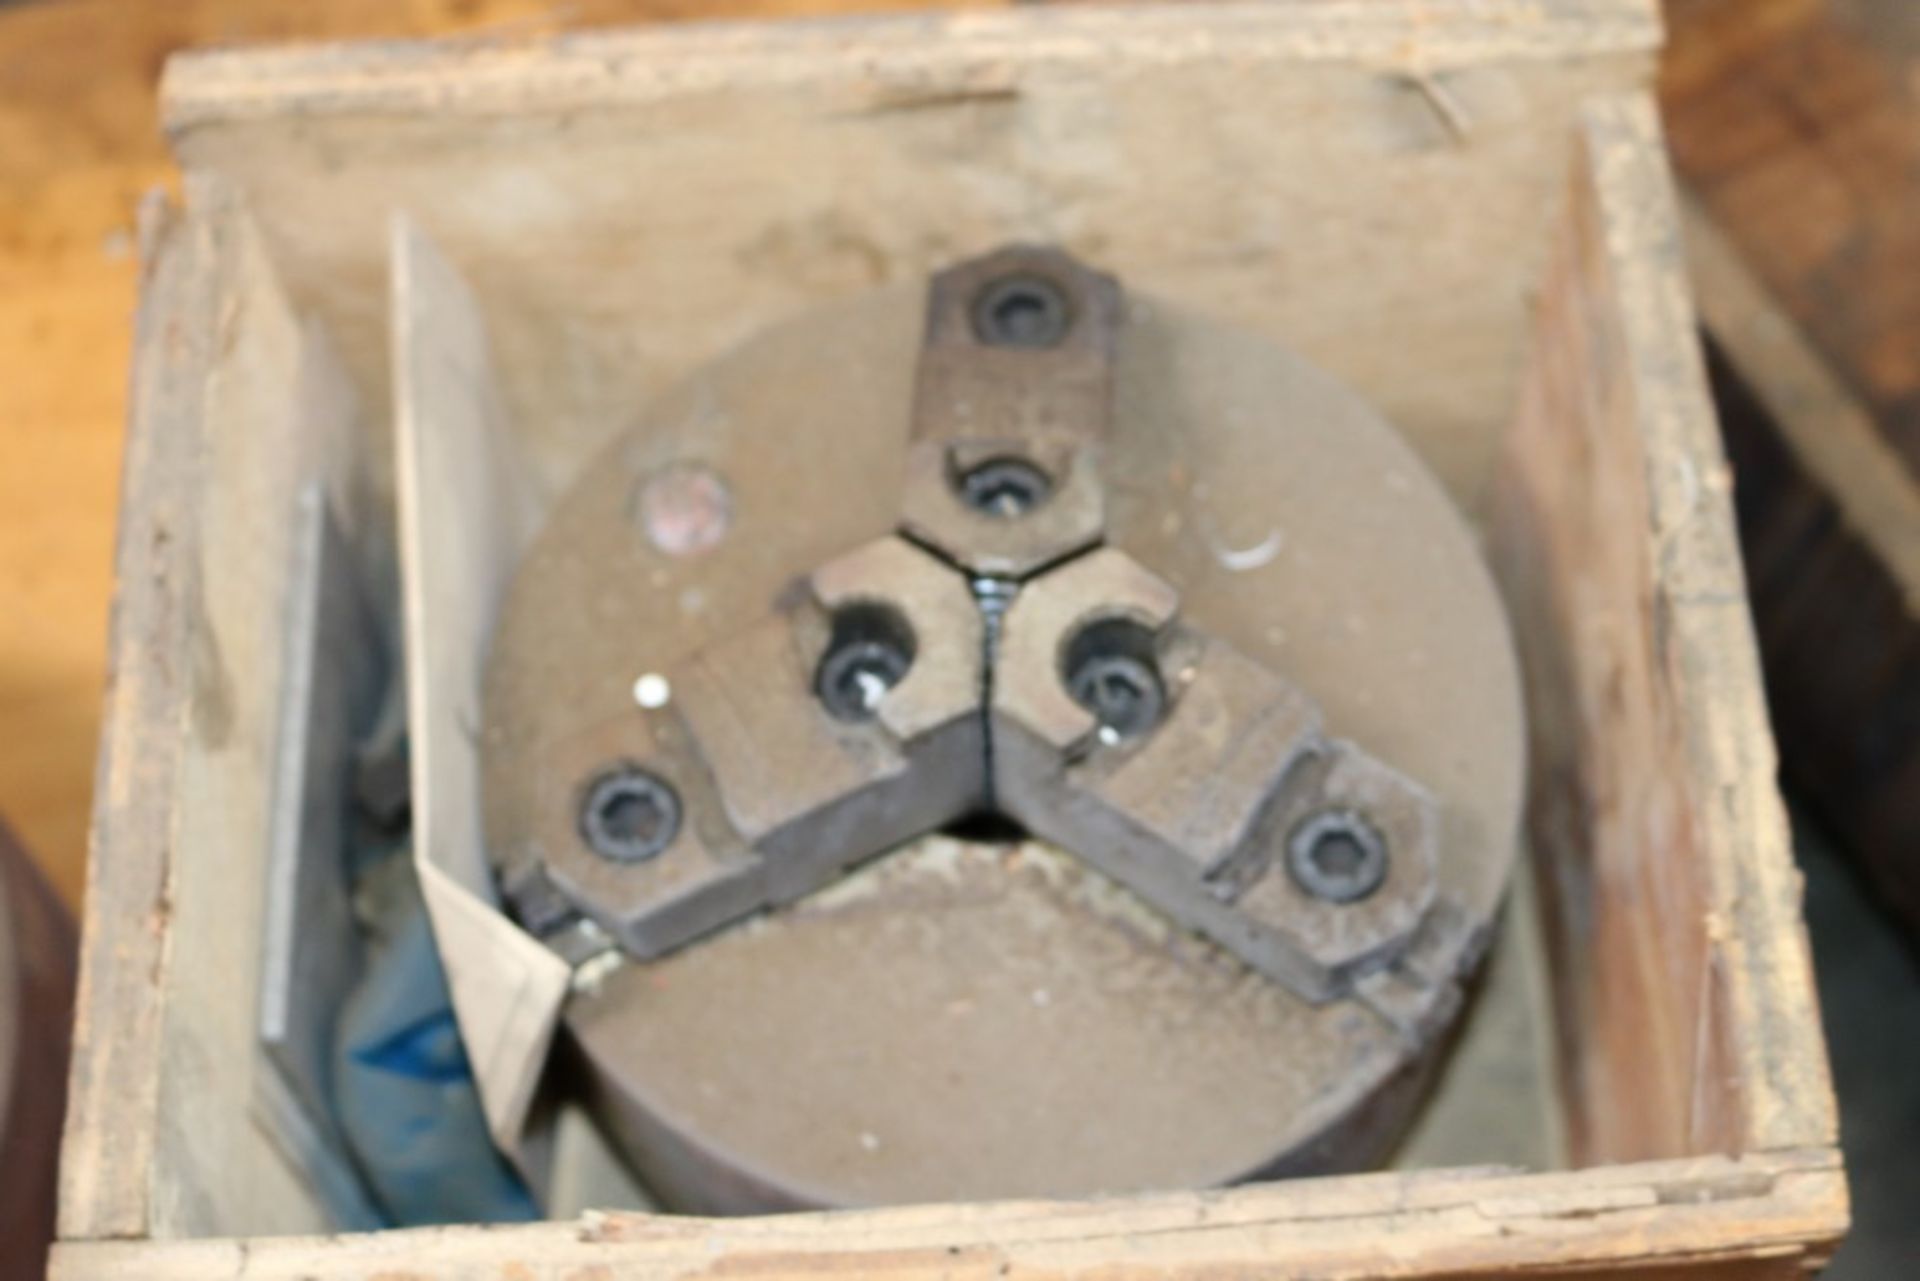 6" 3 Jaw MG Chuck, 8" 3 Jaw Chuck (No Name), 8" 3 Jaw Econ Chuck Solid Jaws - Image 4 of 4